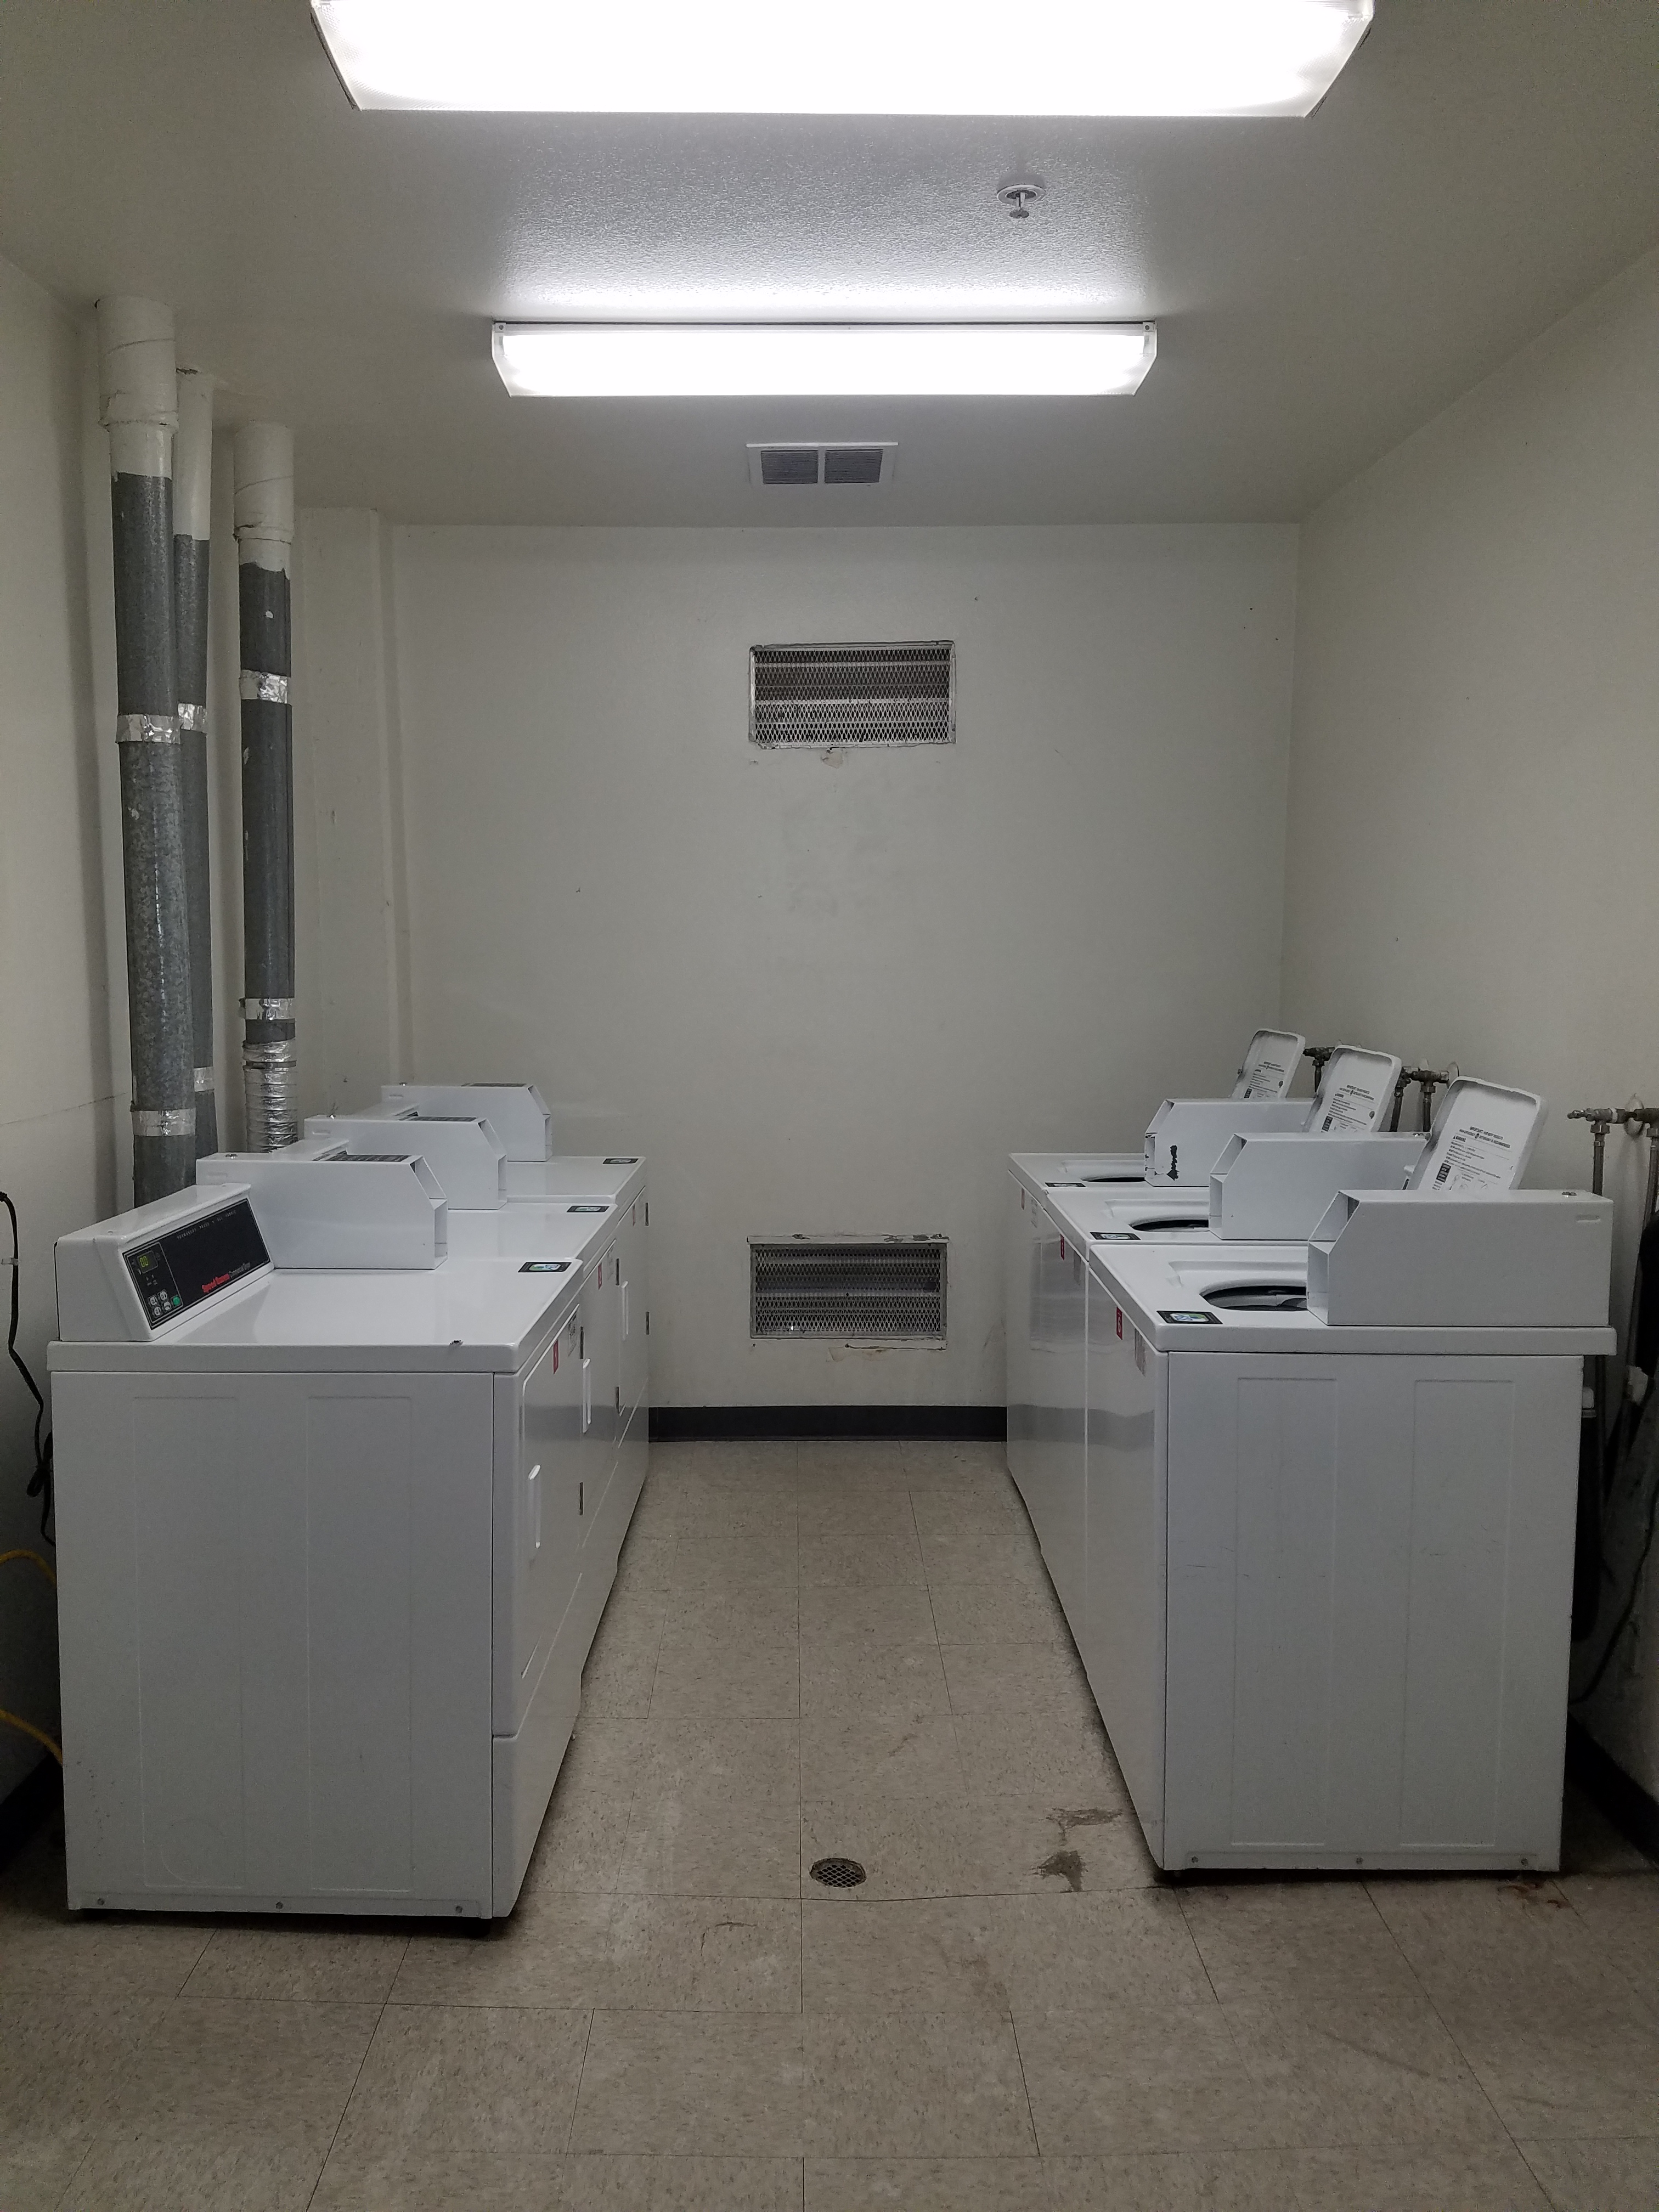 Parthenia Court laundry room. threewhite top load washers and across from them are three white front load dryers.